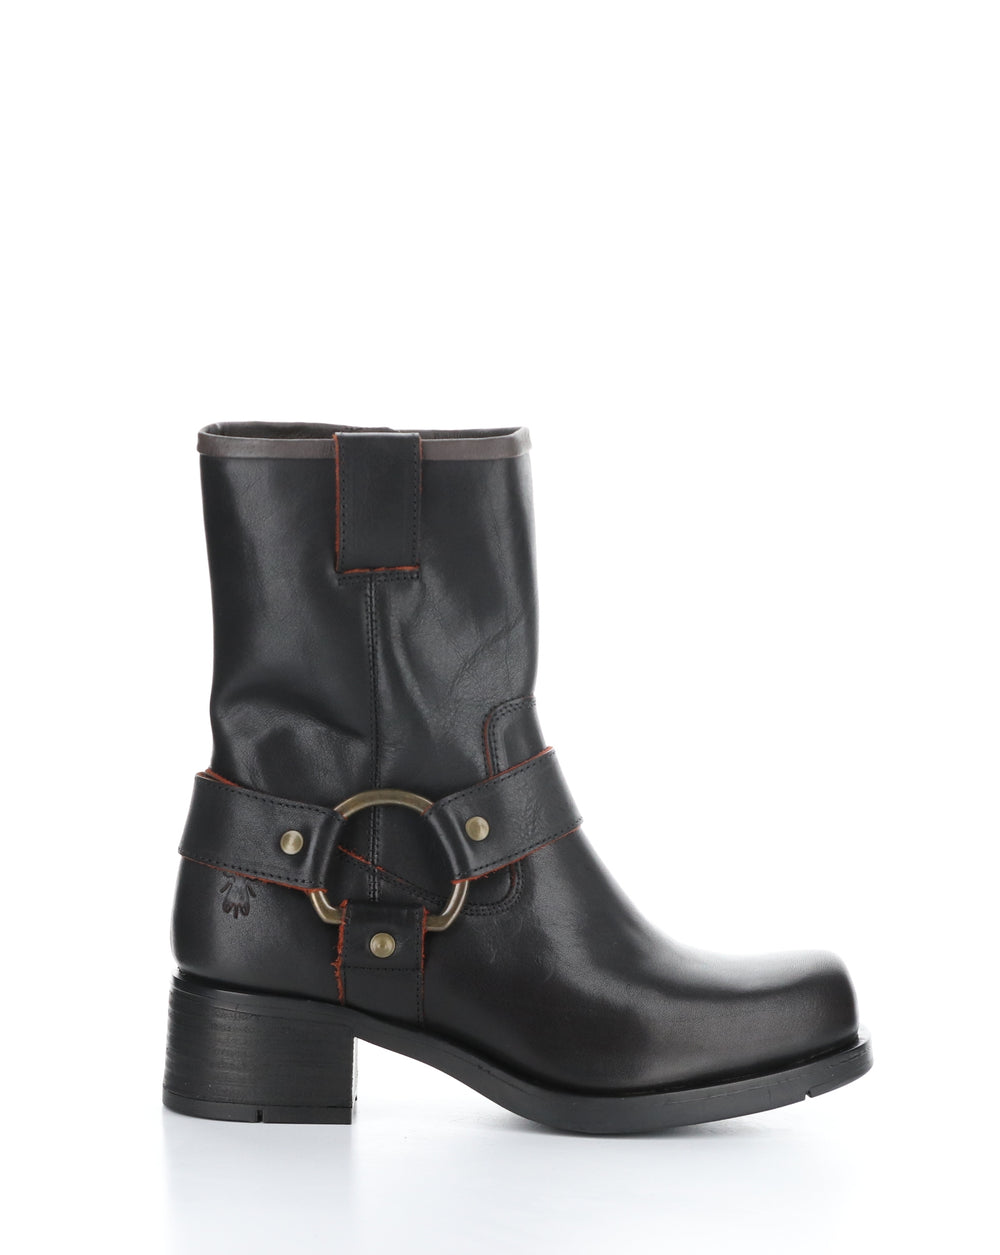 REVA010FLY 002 BLACK/RED Round Toe Boots